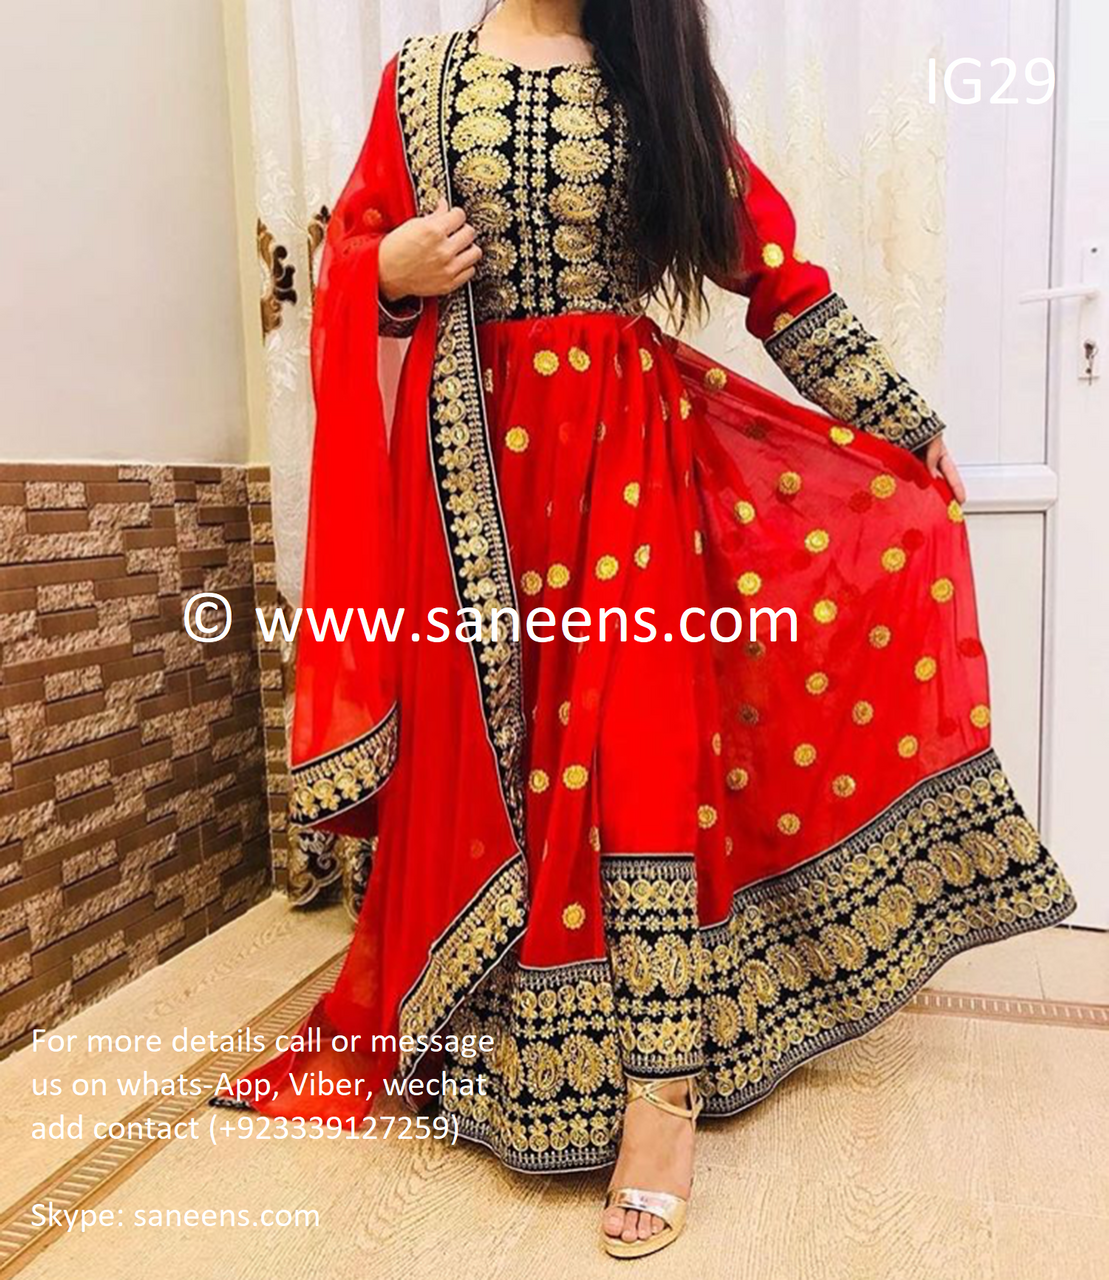 New afghan tradition kuchi type suit in red color with hard embroidery ...